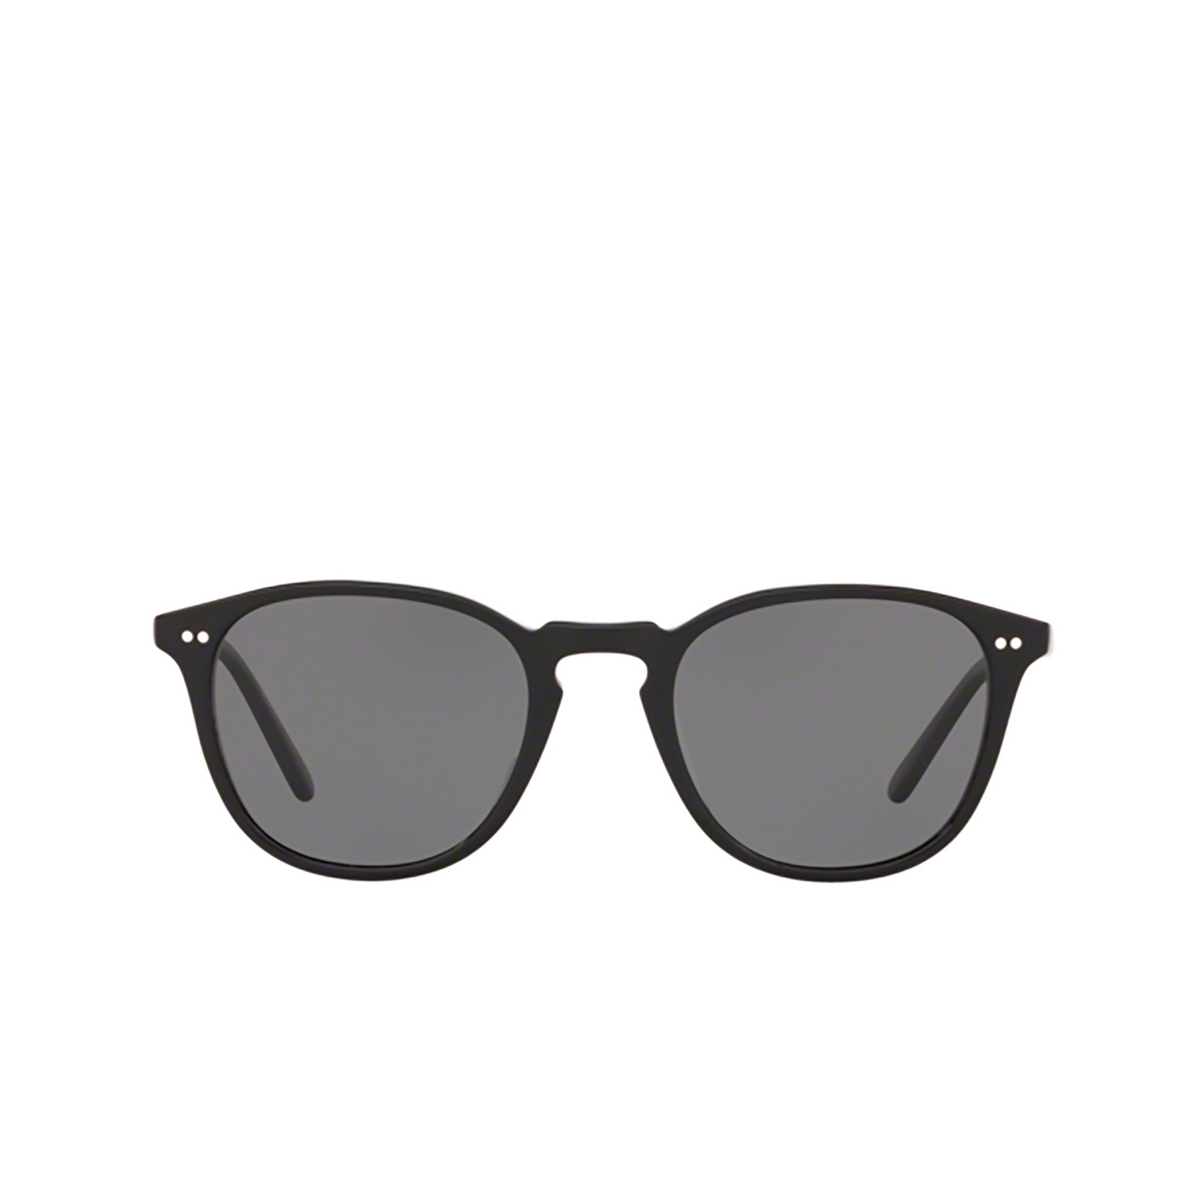 Oliver Peoples FORMAN L.A Sunglasses 100581 Black - front view